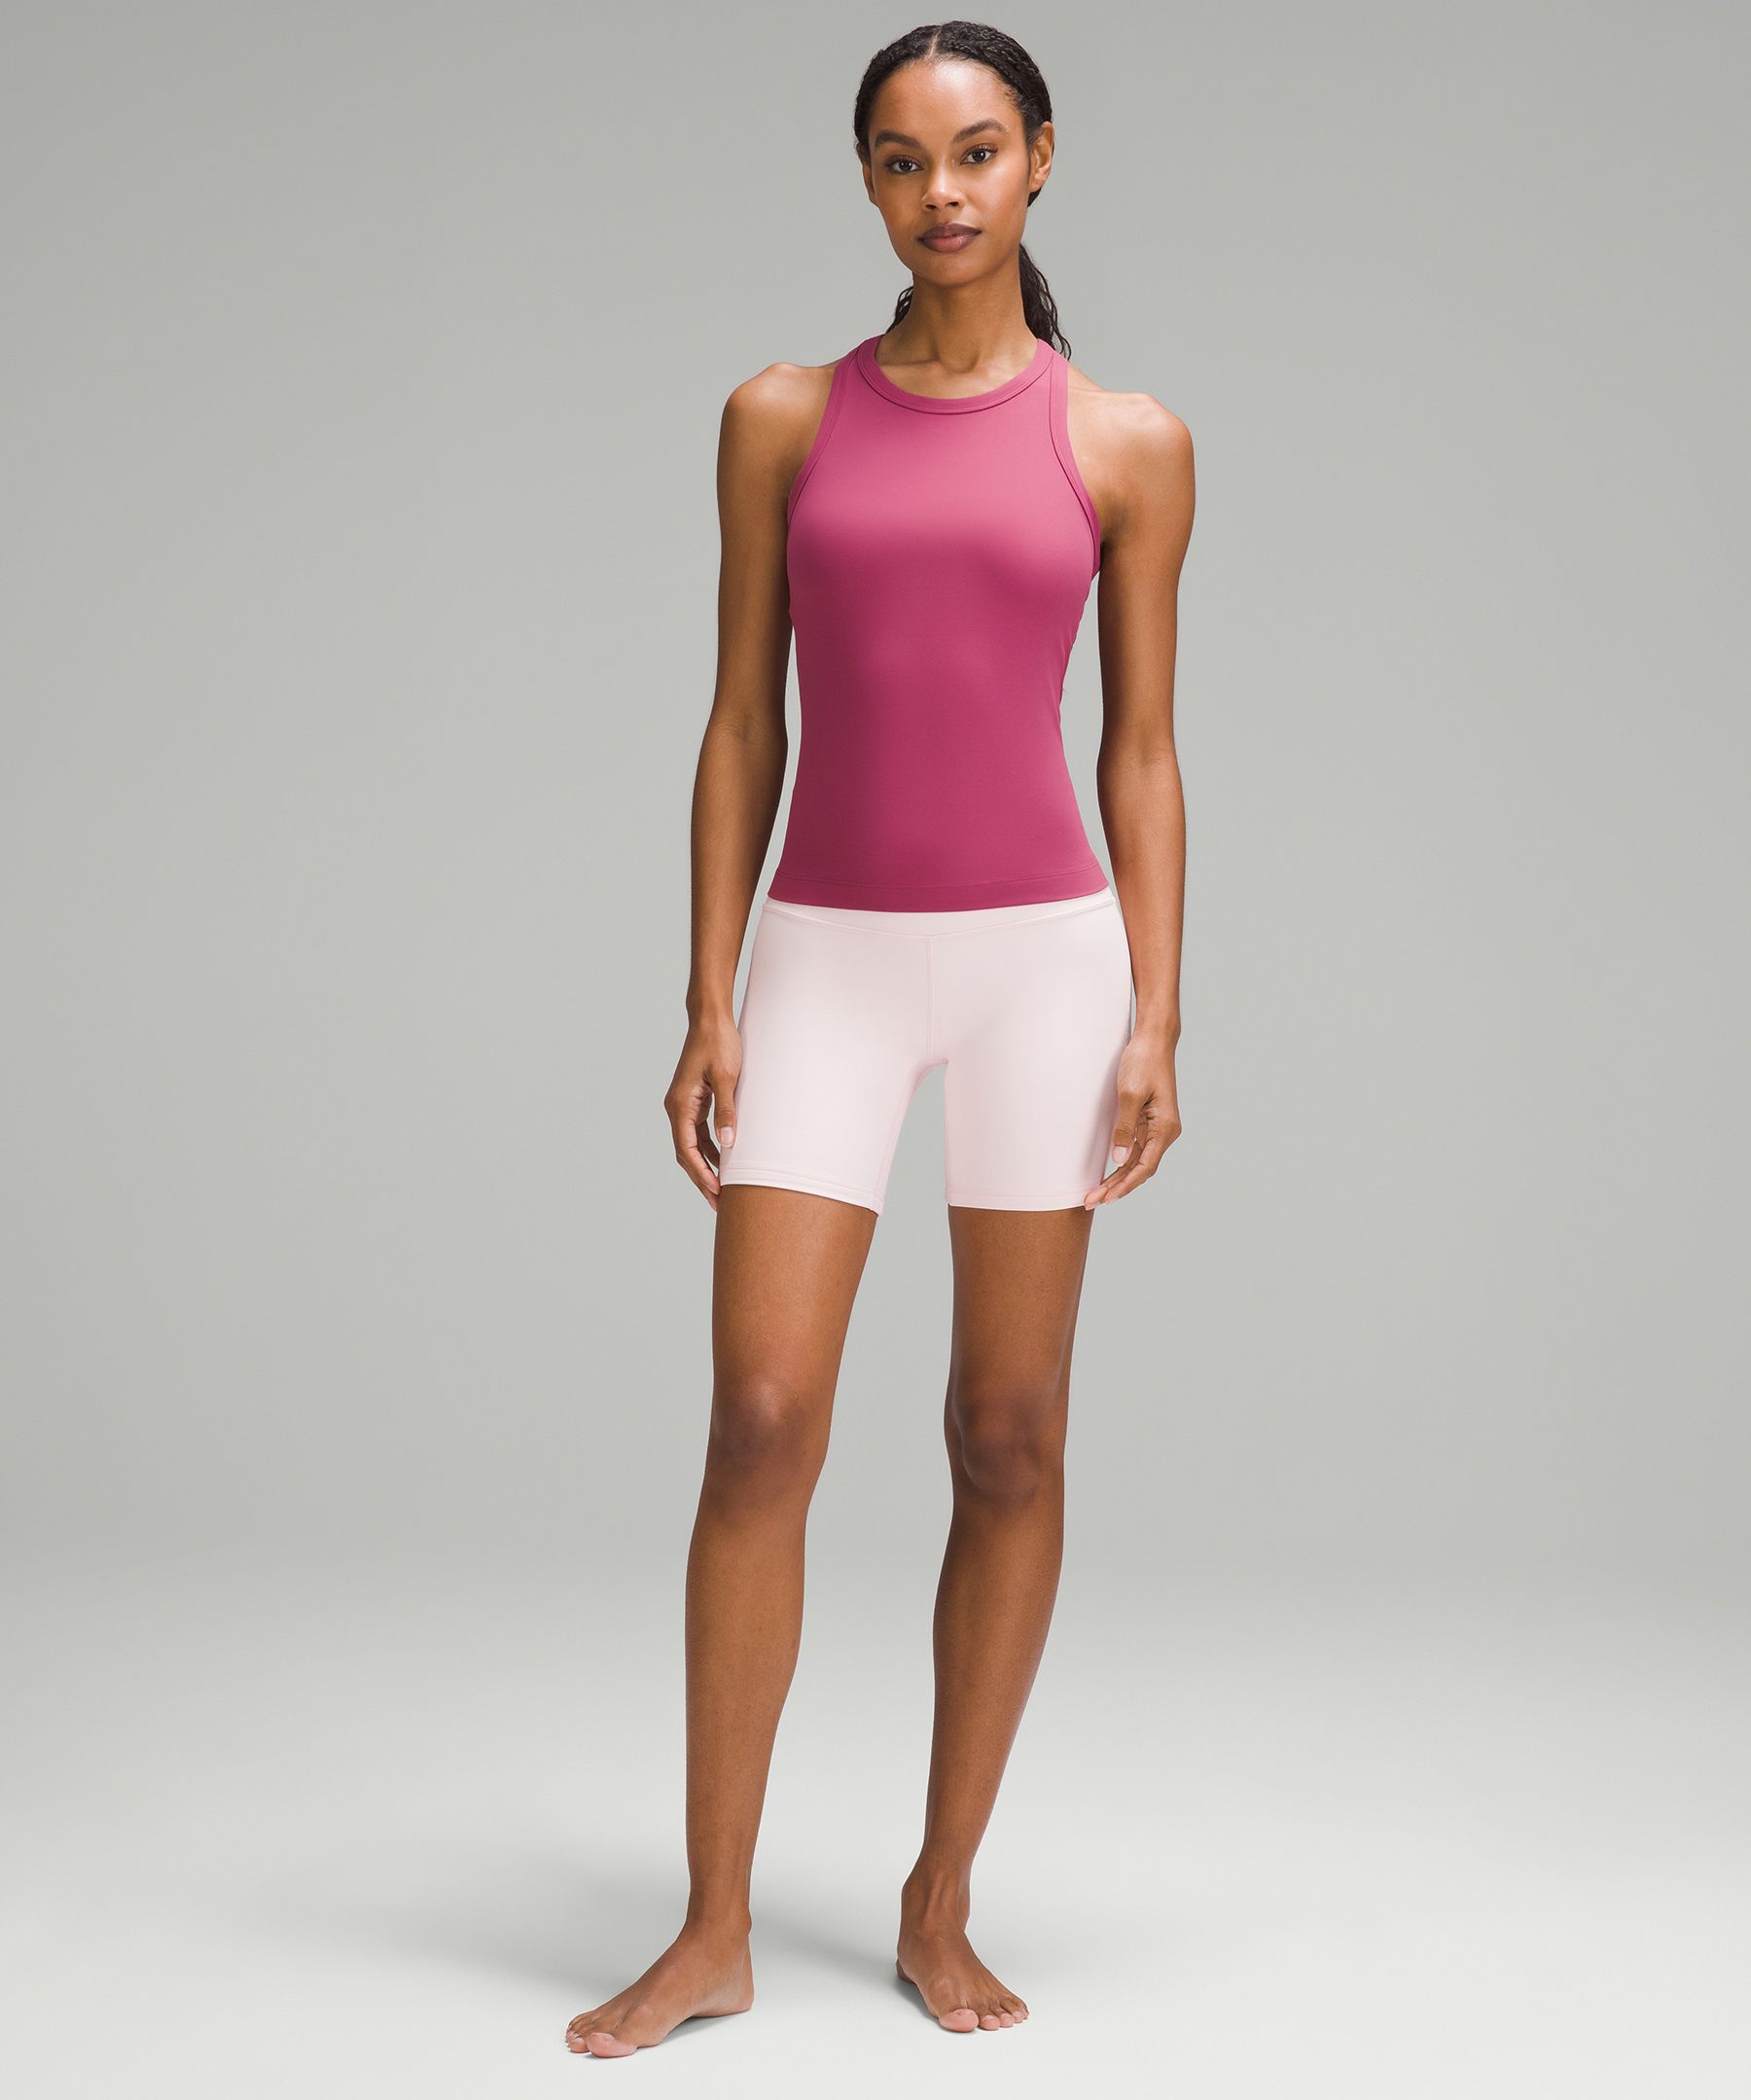 Lululemon baby pink racer back tank size 4 small. New Without Tags